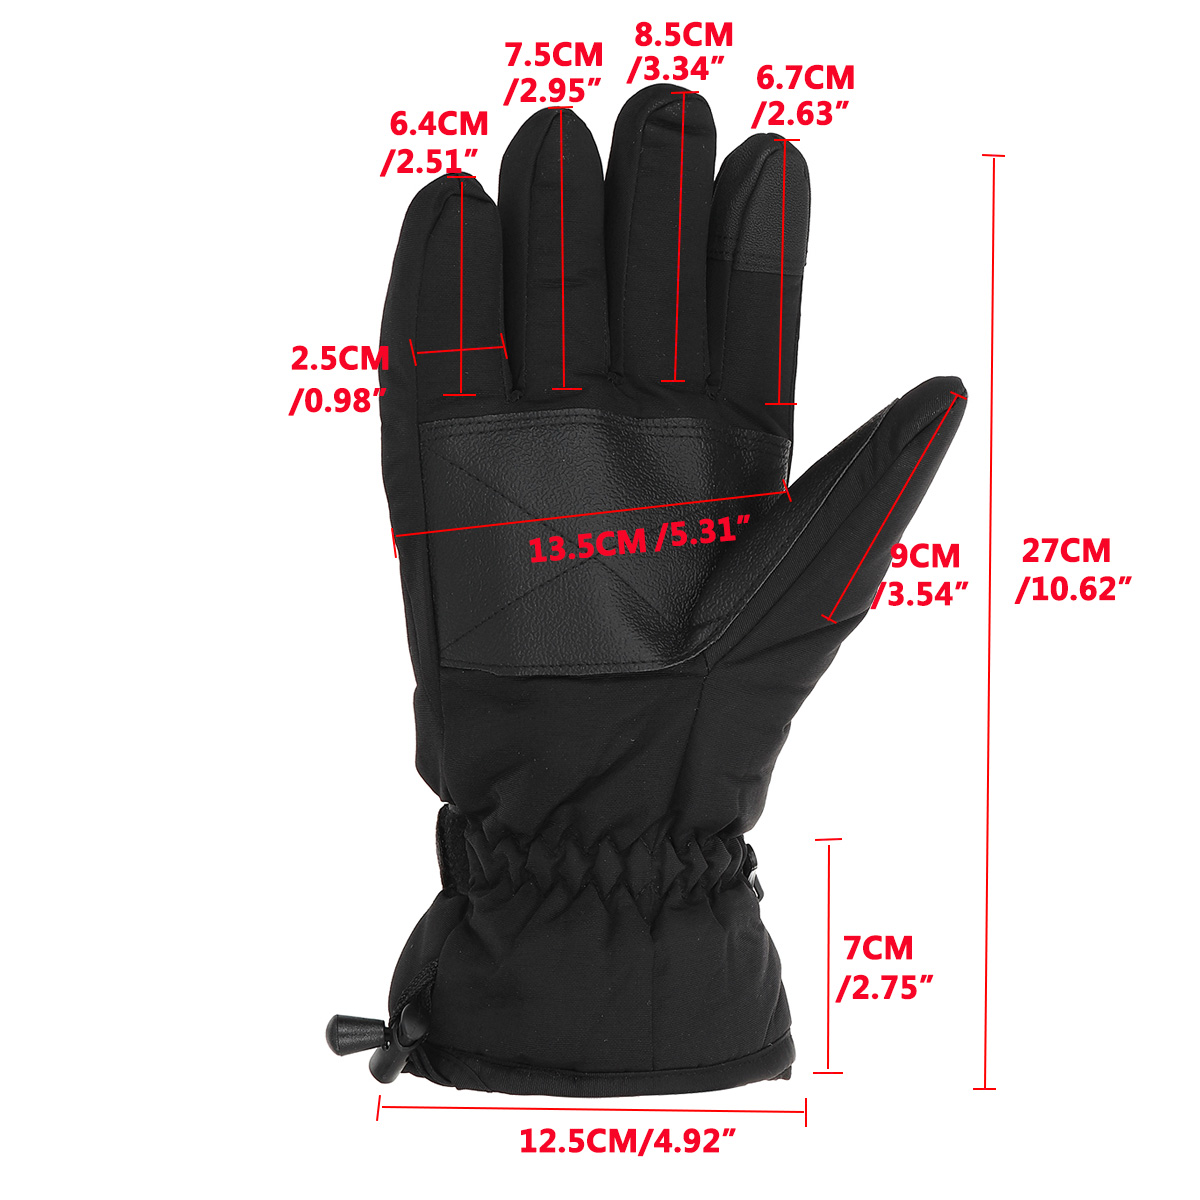 1-Pair-Electric-Heated-Hand-Gloves-3-Modes-Touchscreen-Motorbike-Motorcycle-Winter-Warm-Heated-Batte-1756429-2